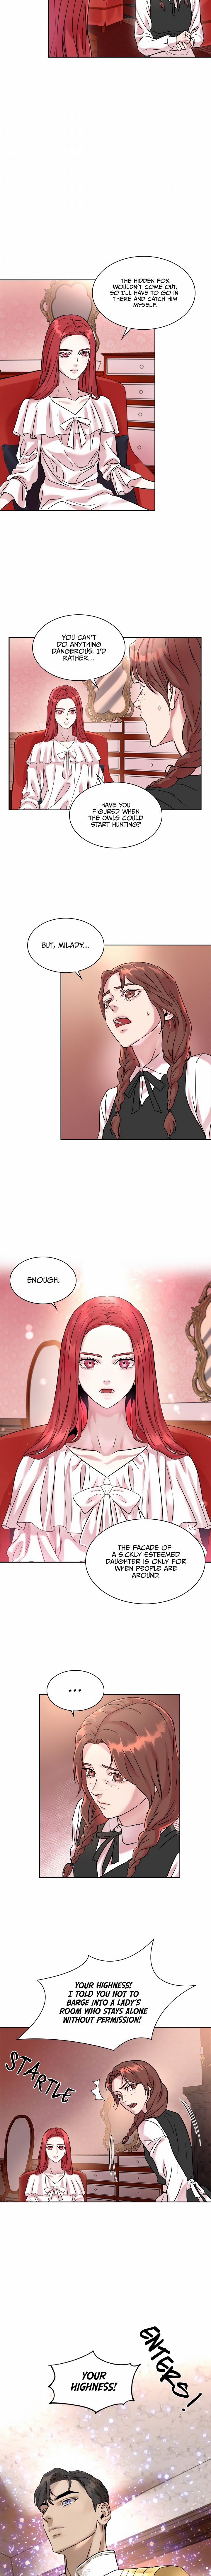 Aideen - Chapter 10 Page 8